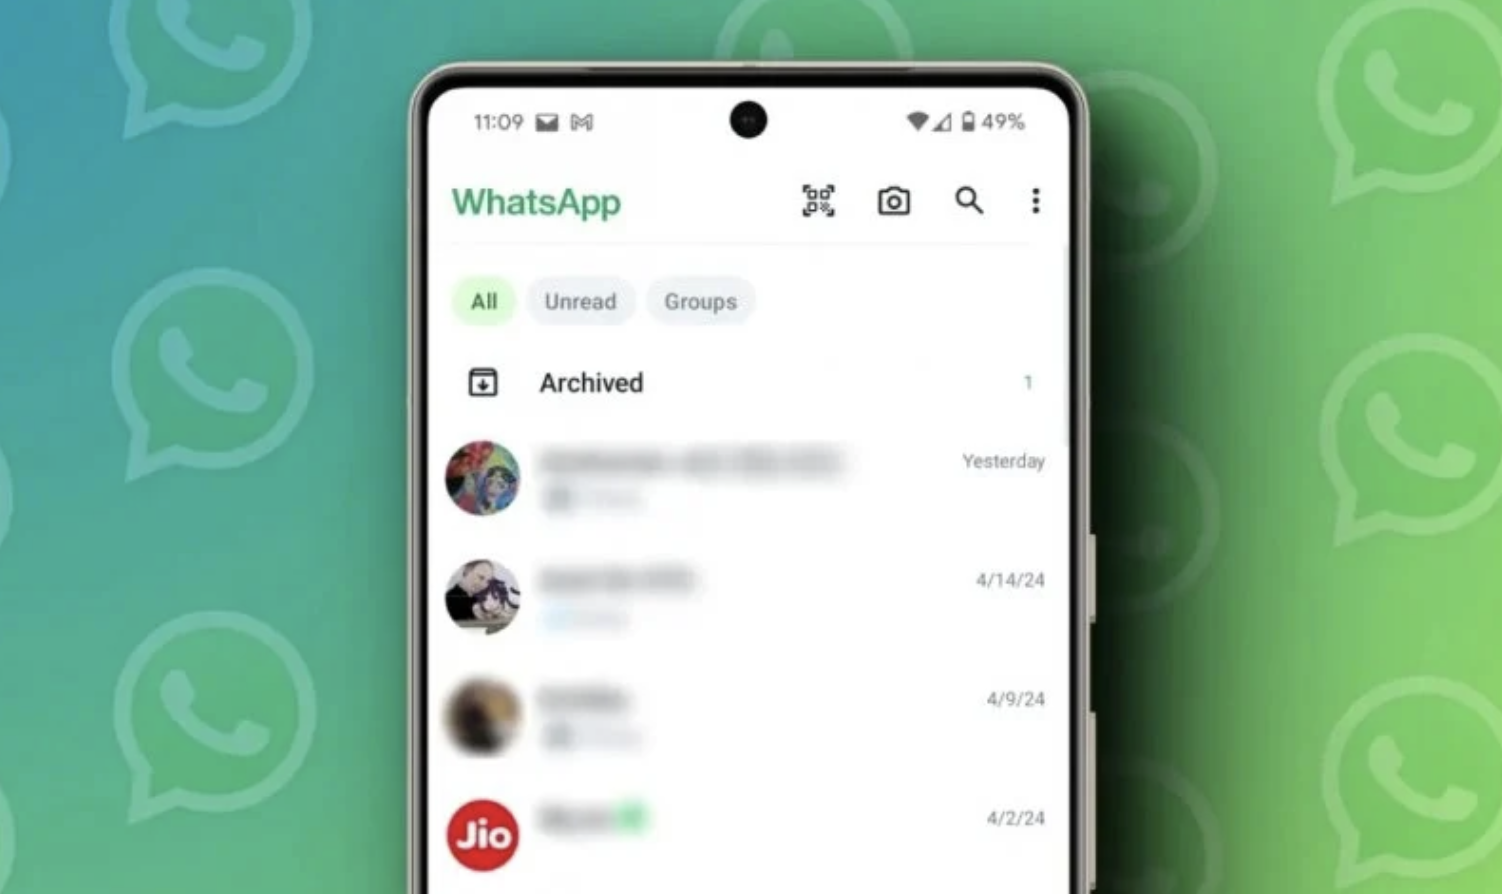 Chat filters arrive on WhatsApp: how they work